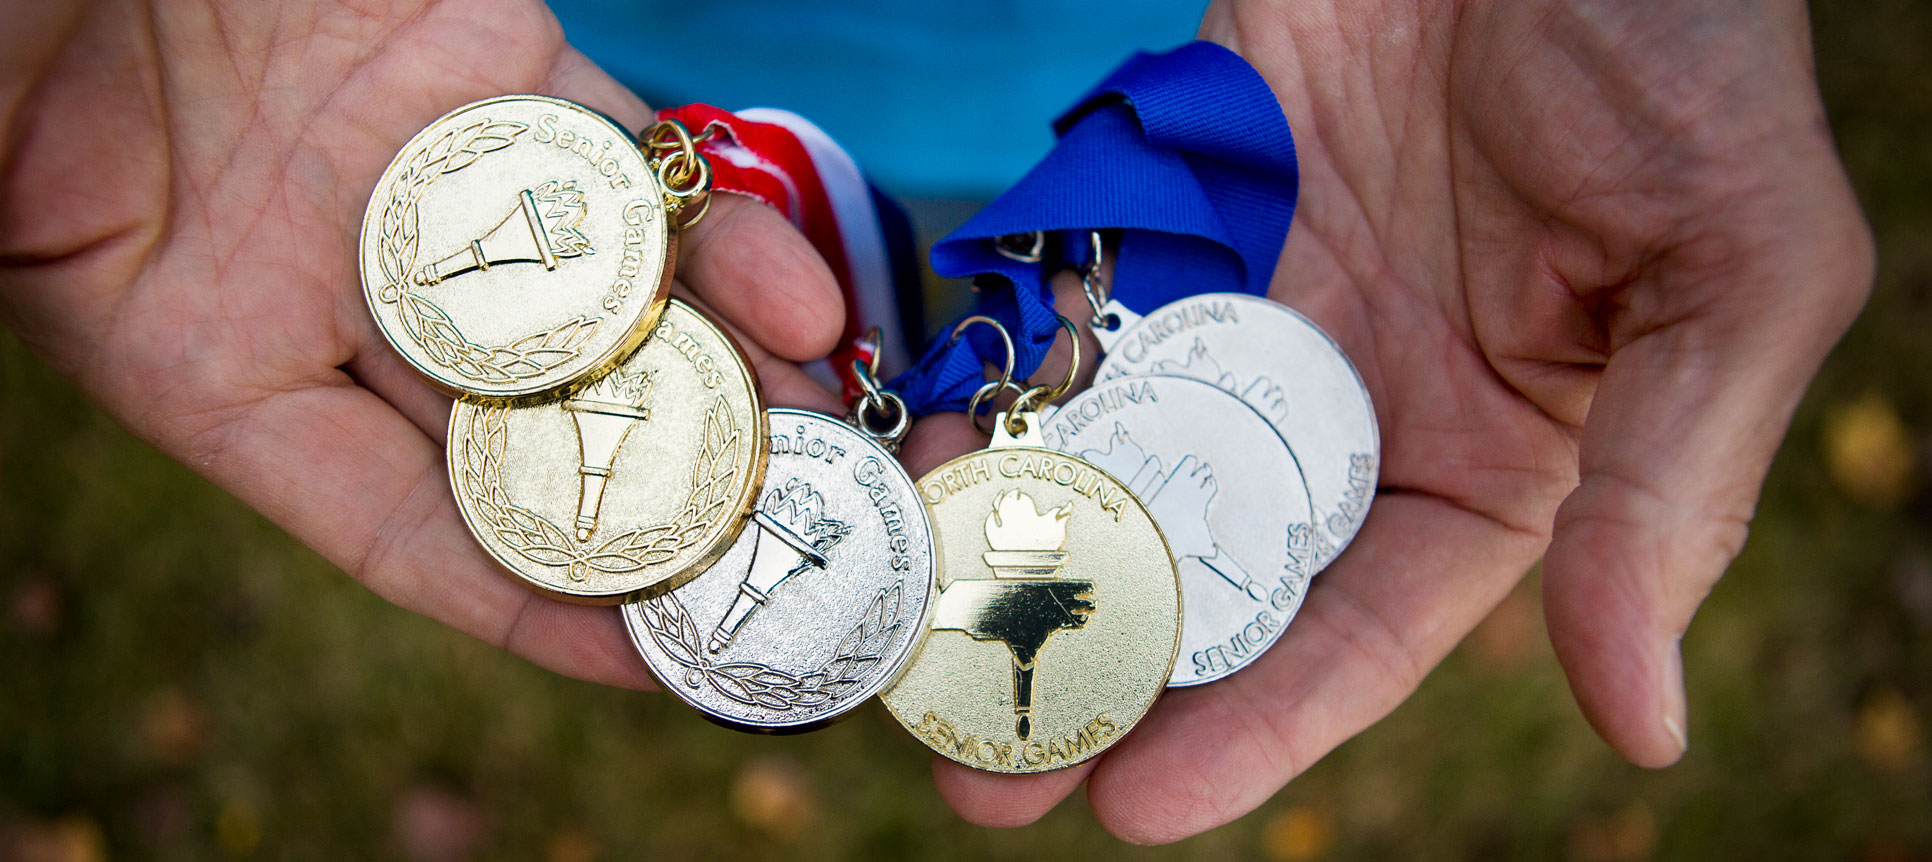 Dick Mazur holds the medals he has won during the Senior Olympics.